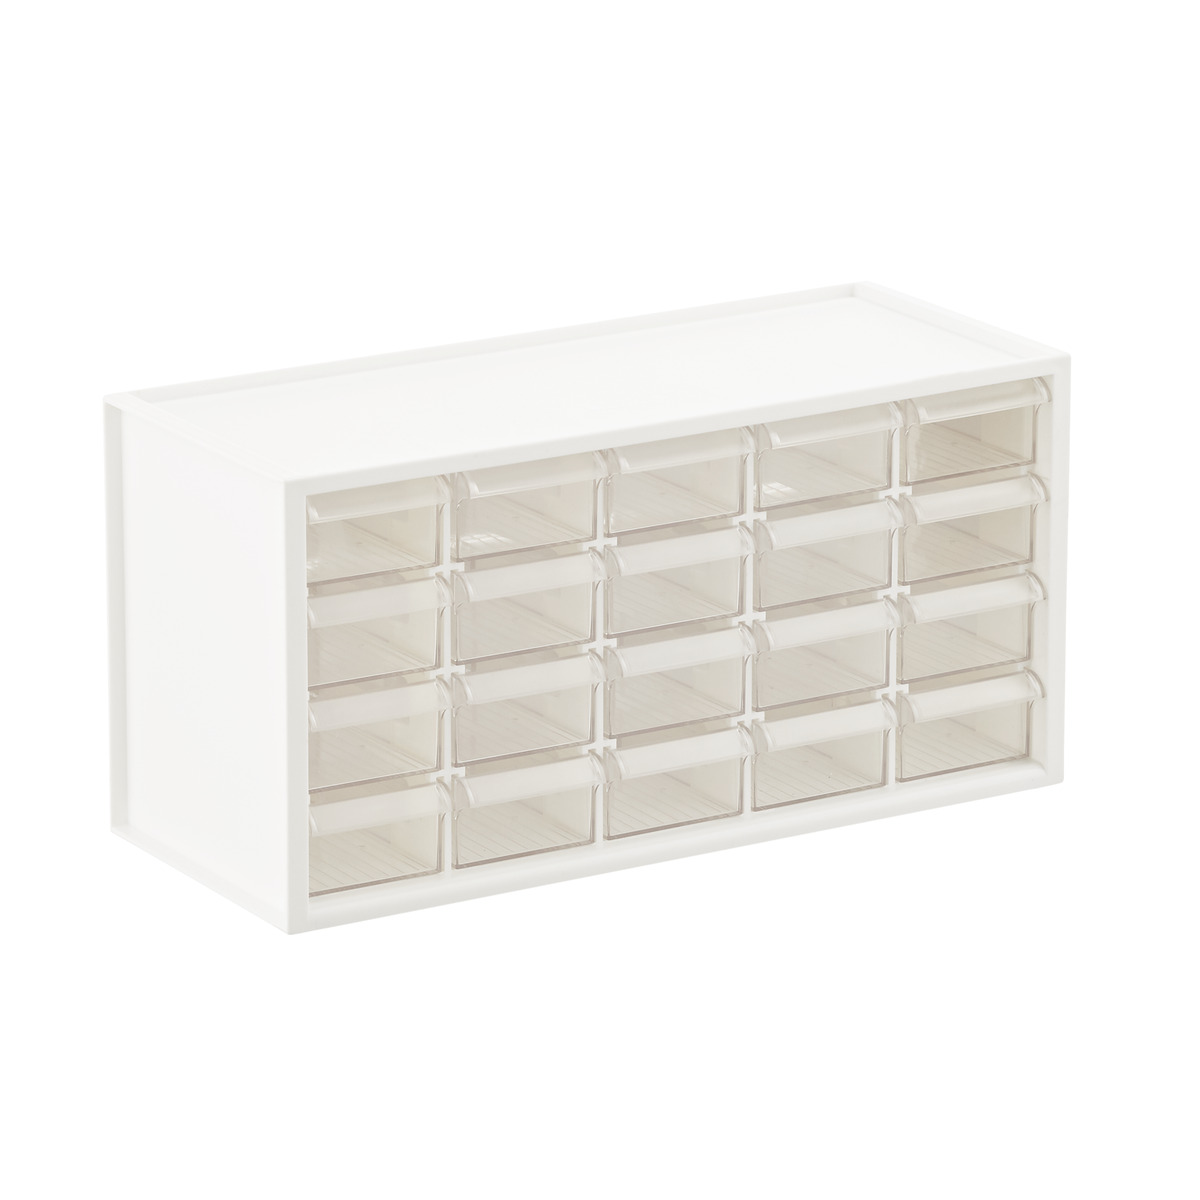 https://www.containerstore.com/catalogimages/405642/10074965-stackable-craft-organizer-2.jpg